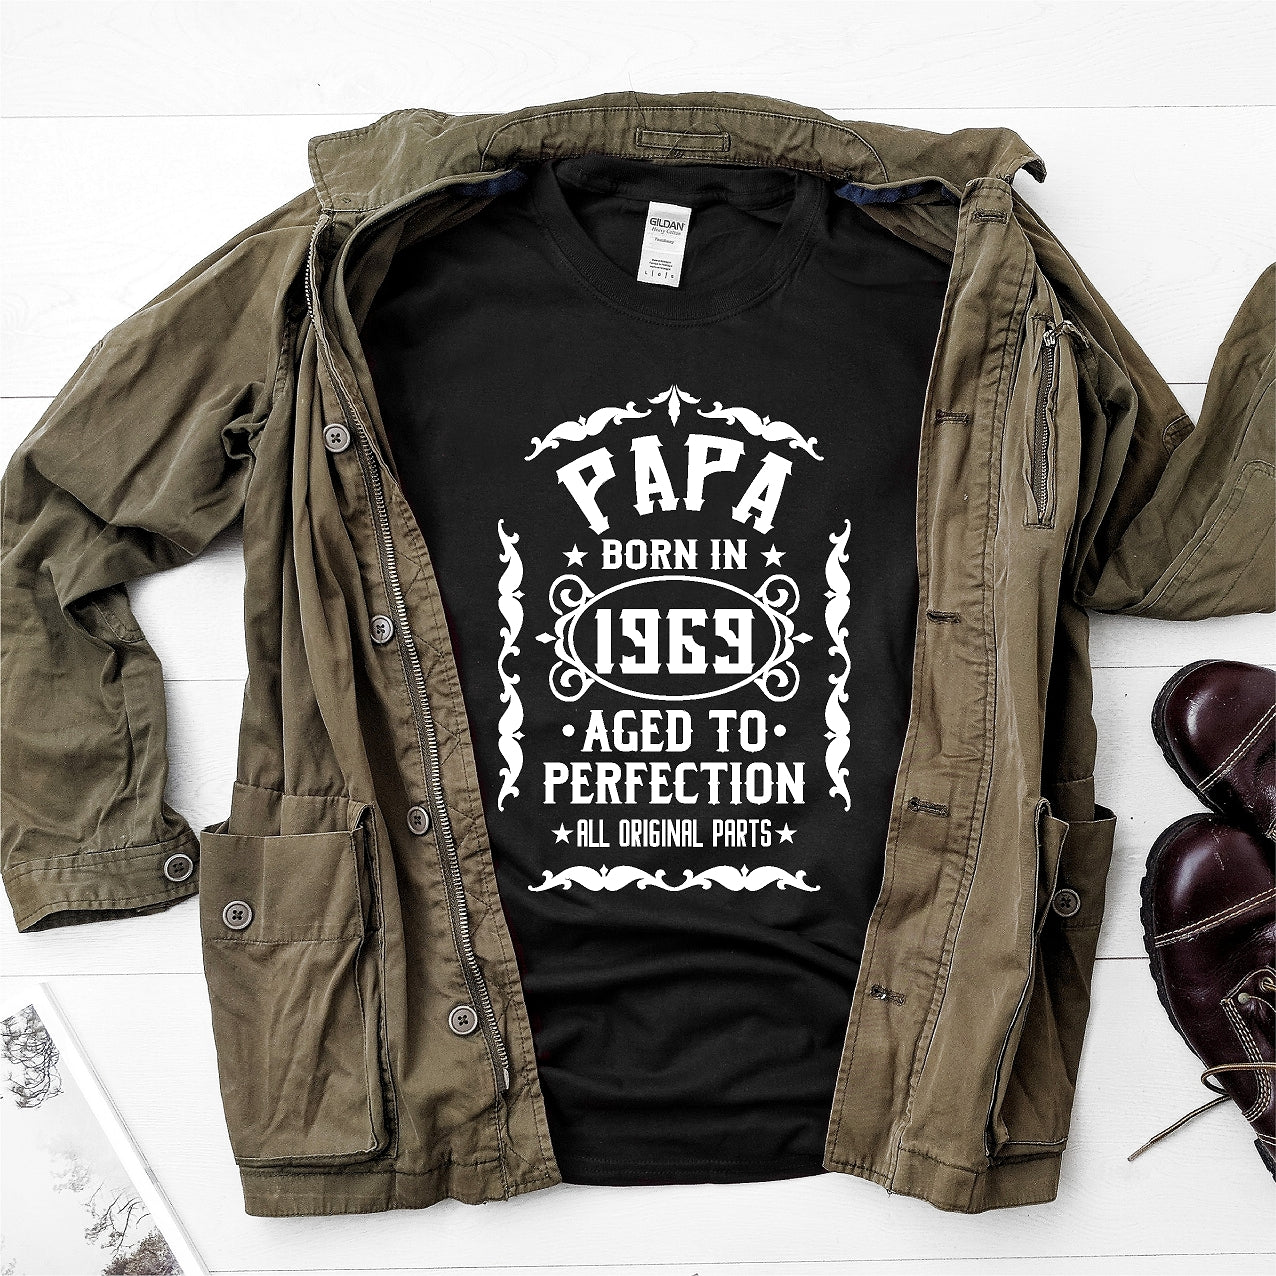 Papa born in 1969 aged to perfection all original parts - Ultra Cotton Short Sleeve T-Shirt - DFHM37